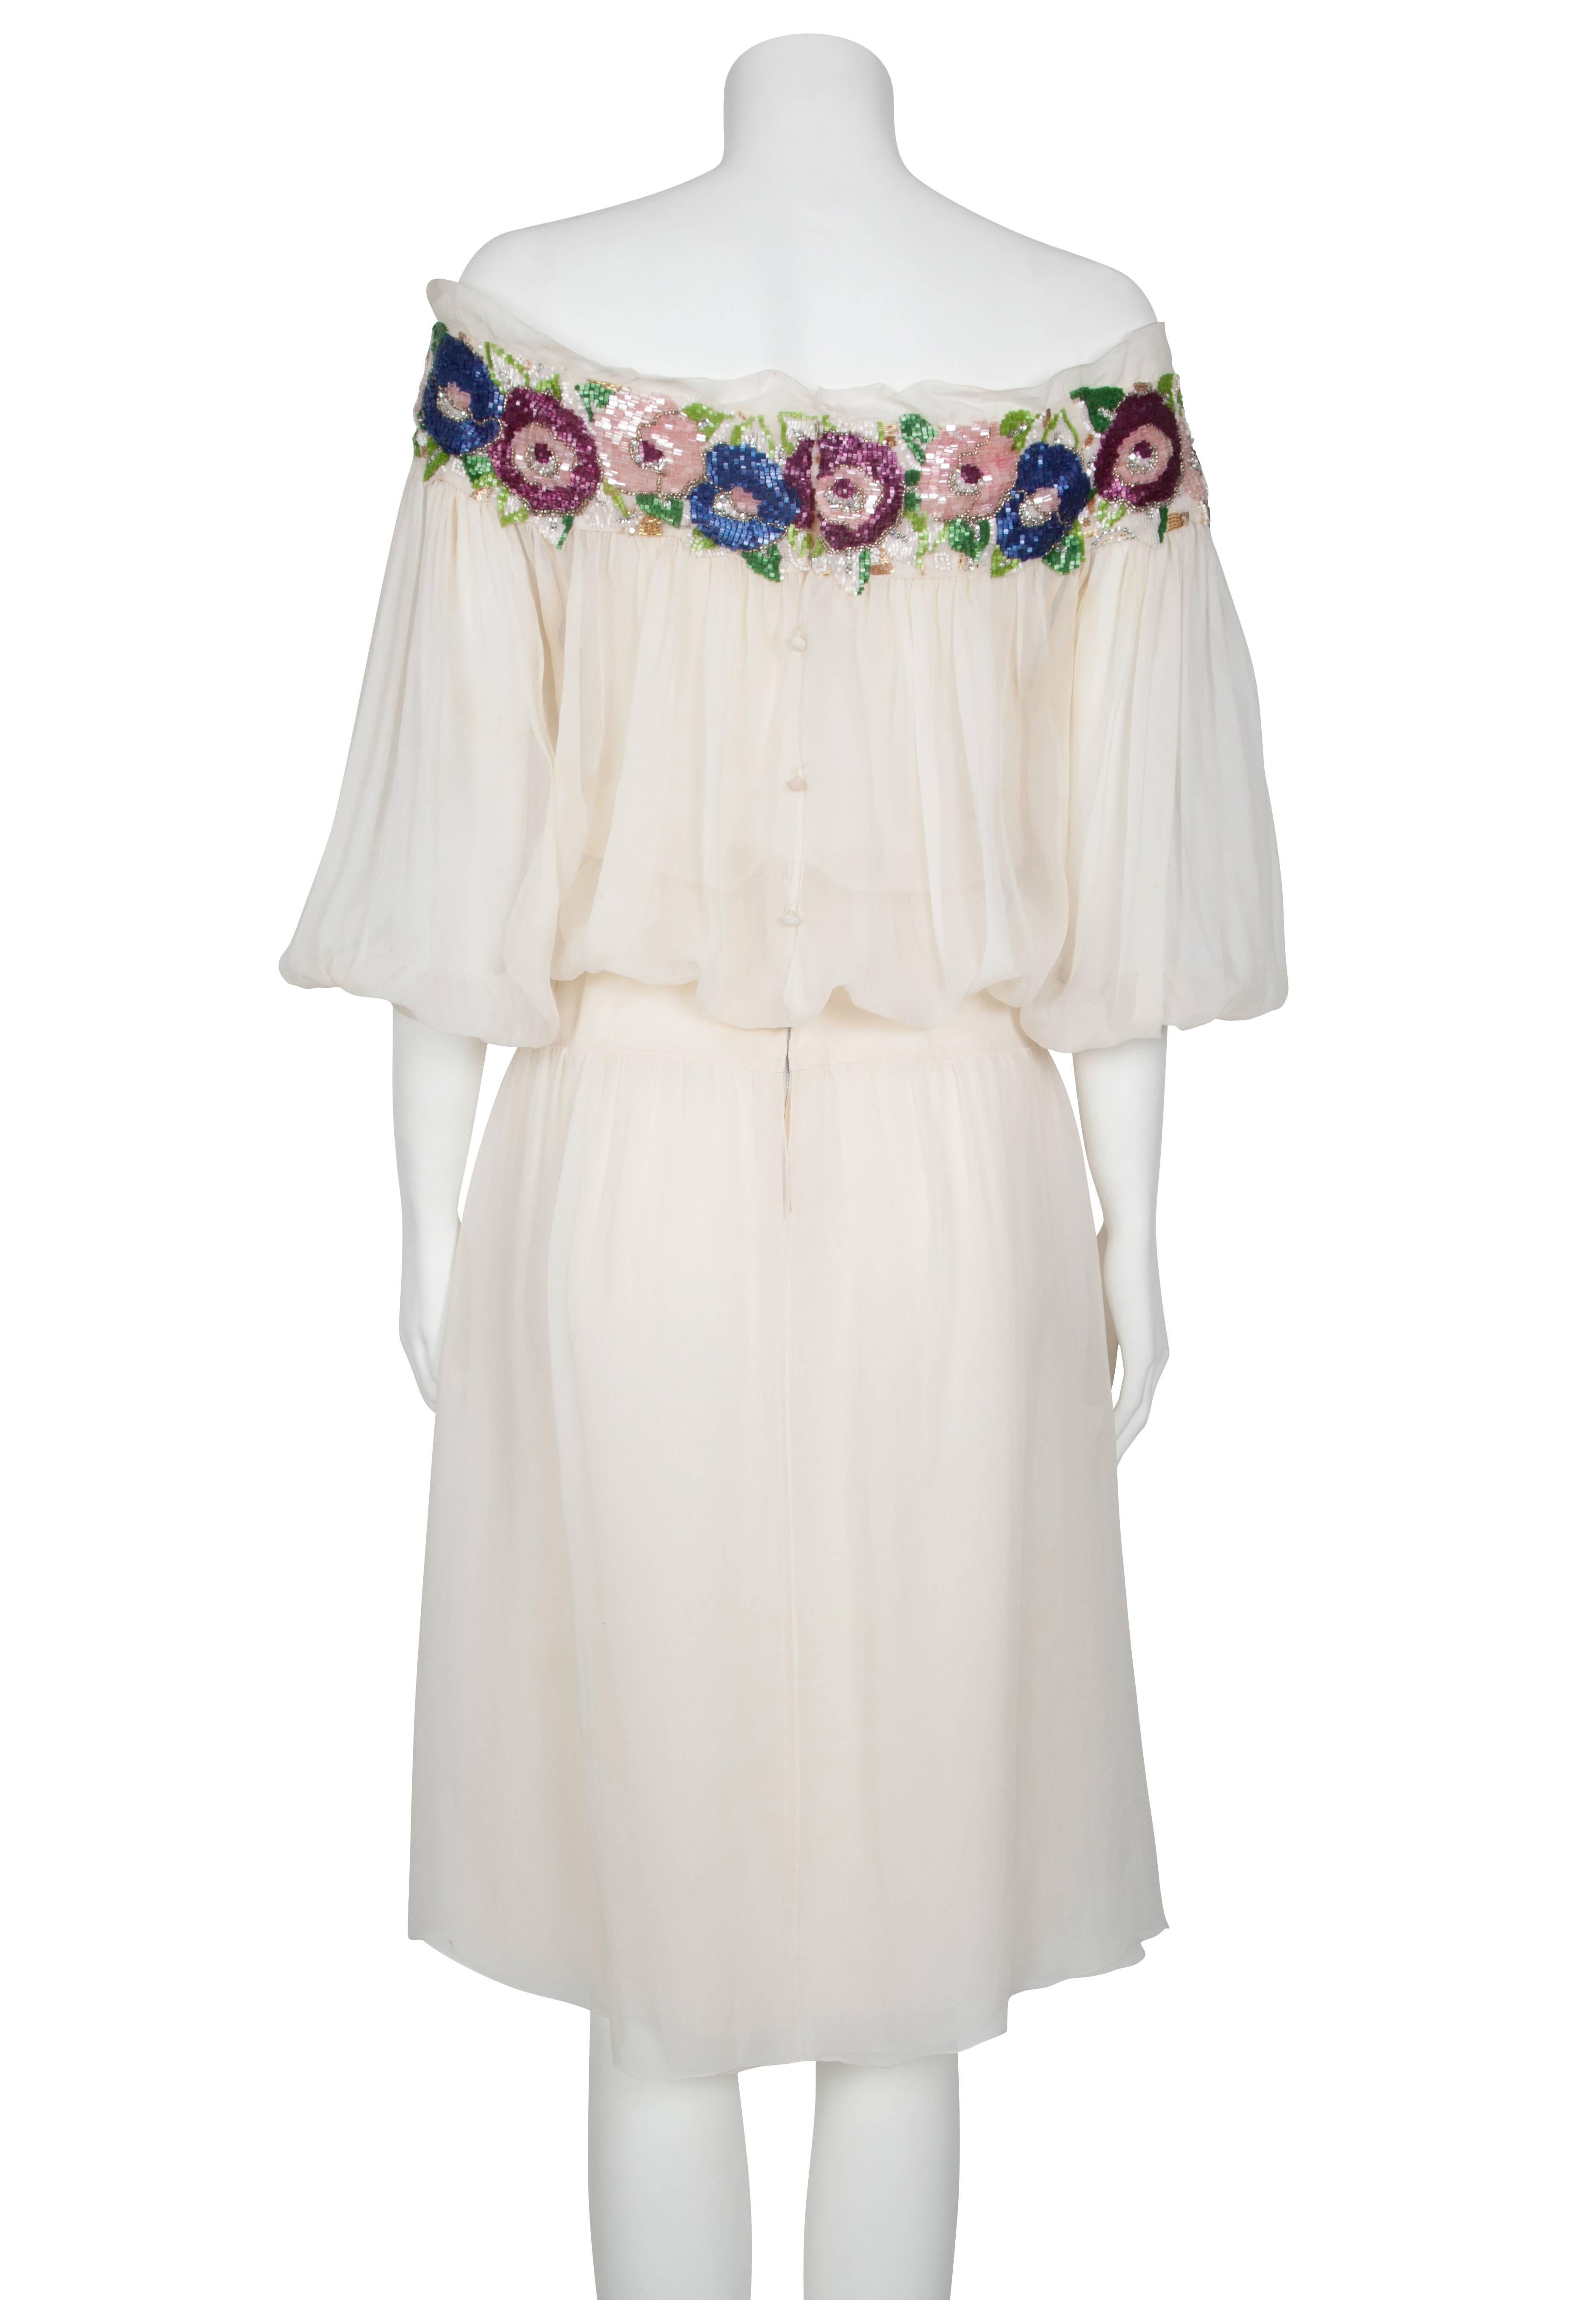 Women's 1980's Christian Dior Ivory Chiffon Dress with Floral Beaded Collar For Sale